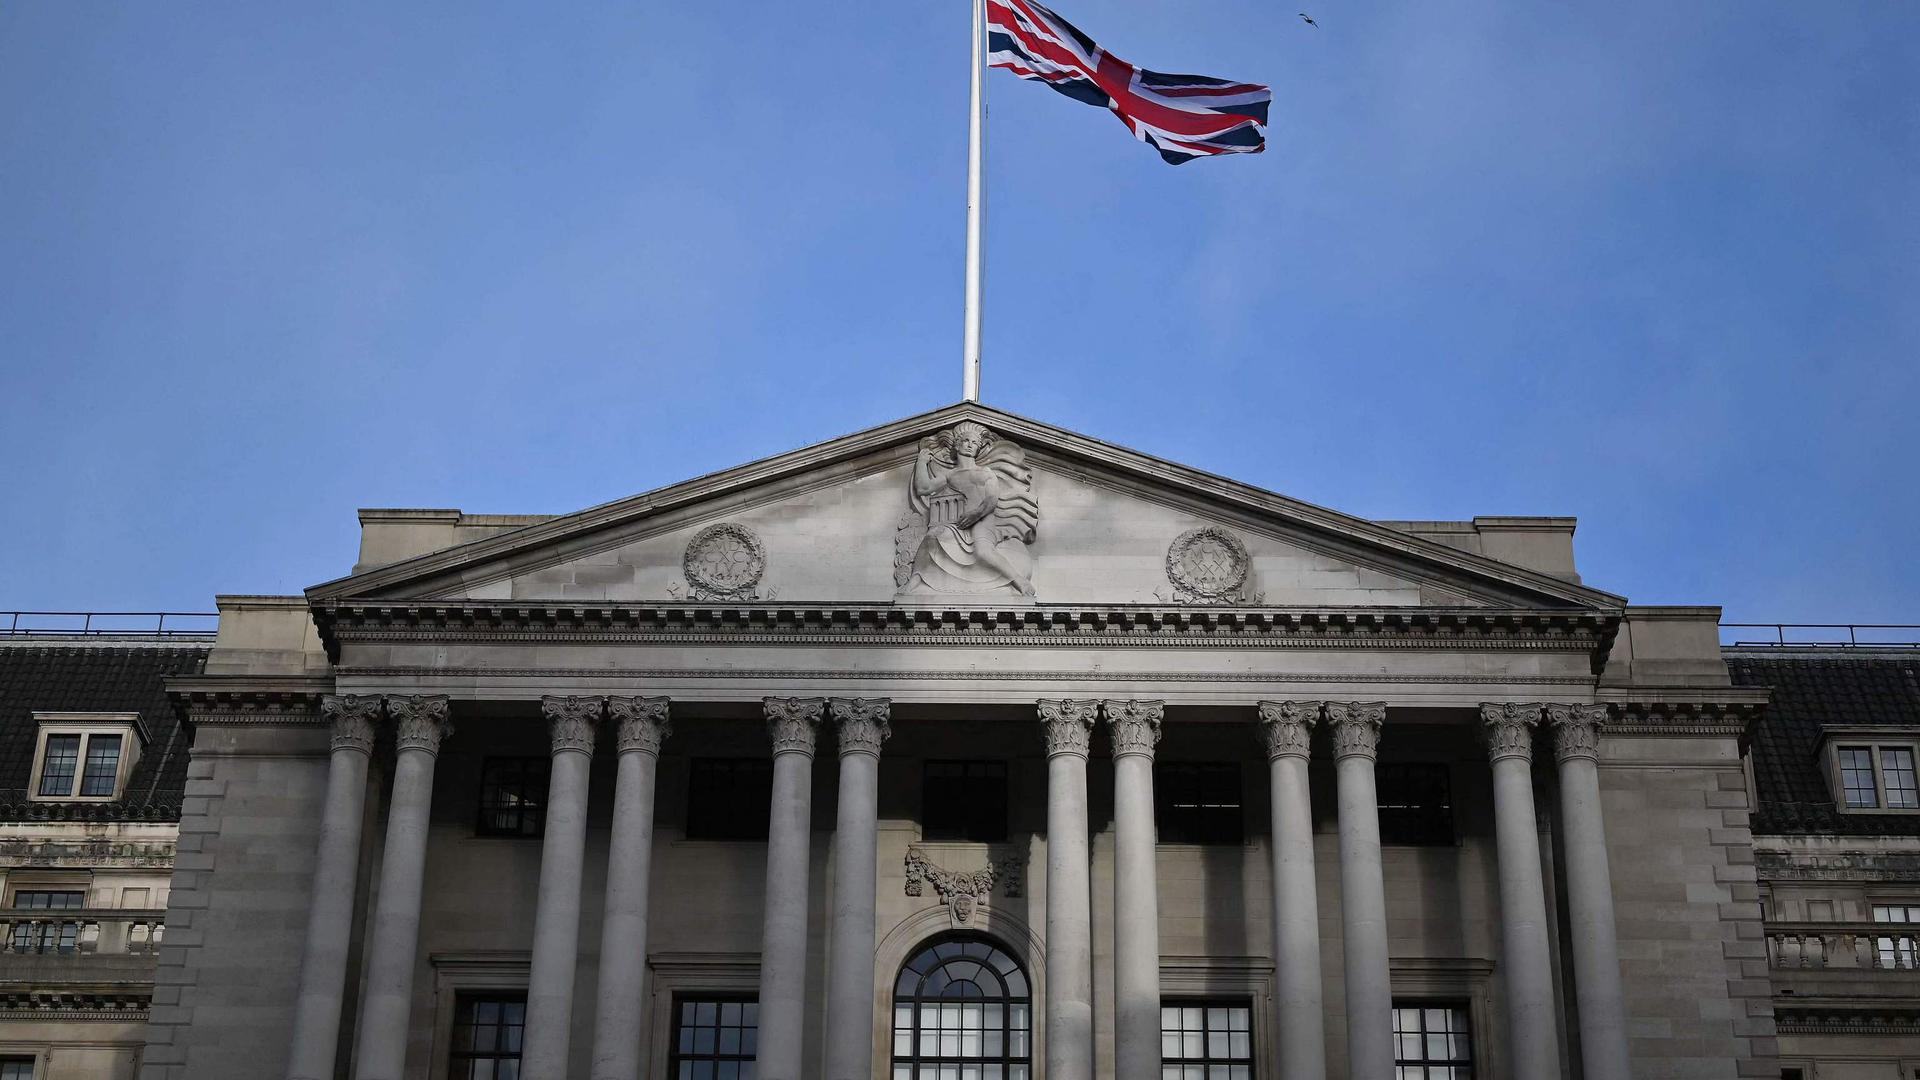 A Union flag flies above the Bank of England, Britain's central bank, in the City of London